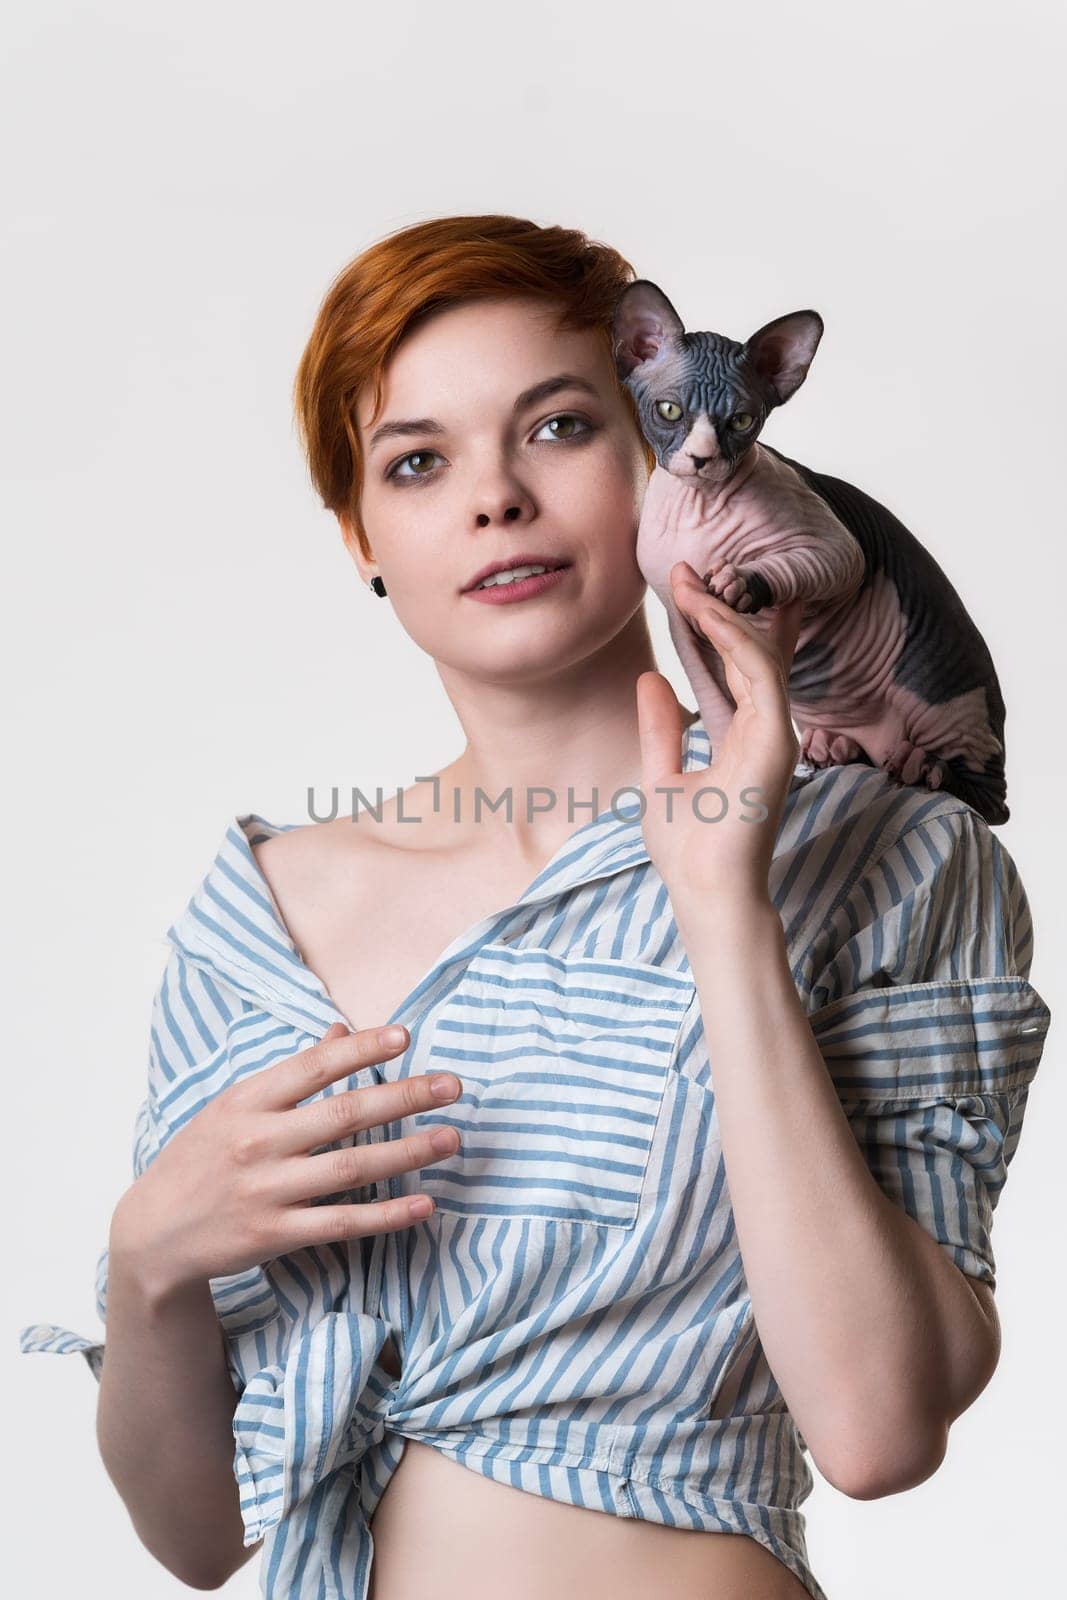 Sphynx kitten sitting on shoulder of beautiful redhead young woman 25 years old. Portrait of female with short hair dressed in striped white-blue shirt. Studio shot on white background. Part of series